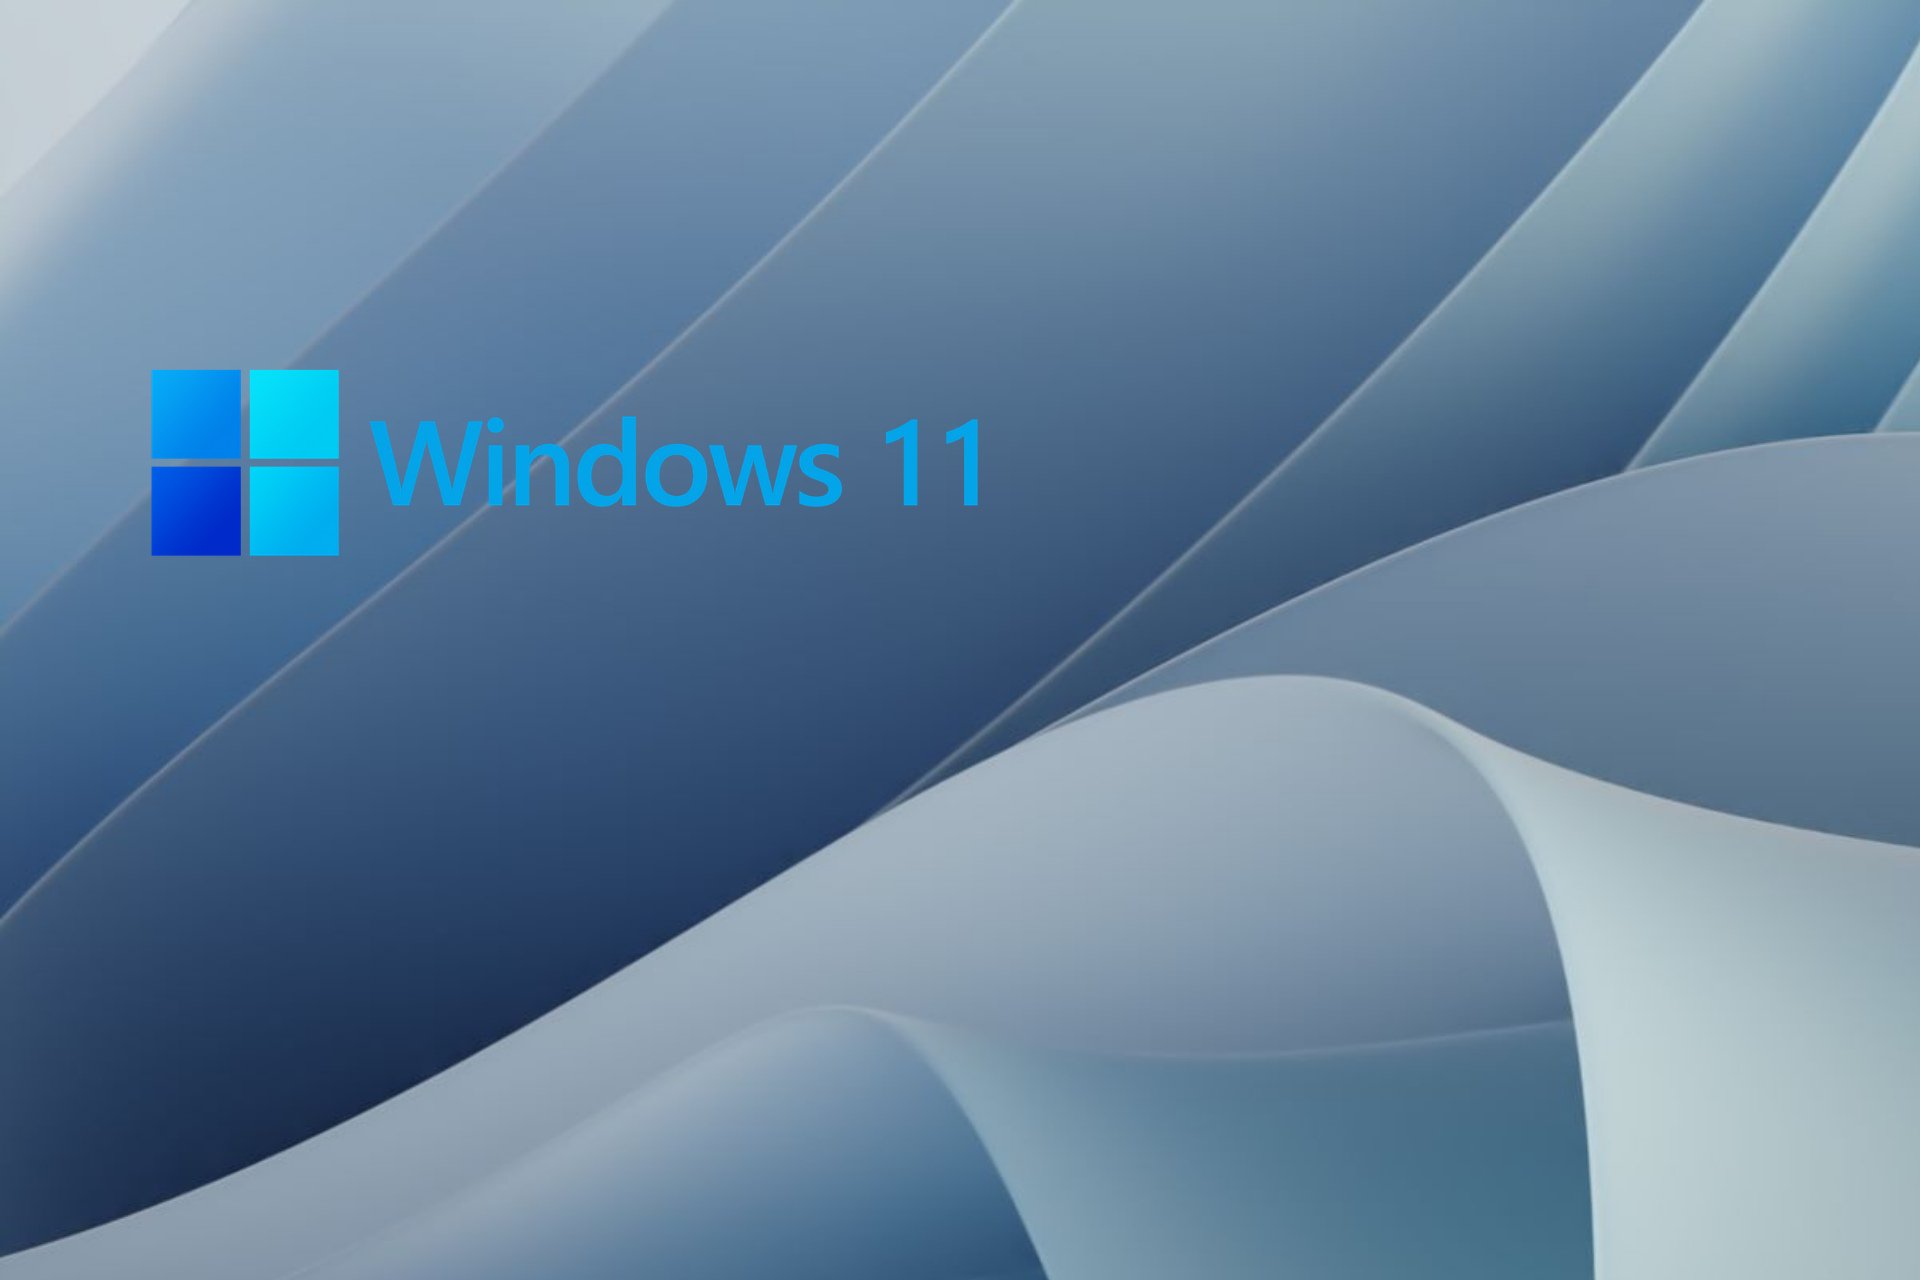 what are the best email clients for windows 7